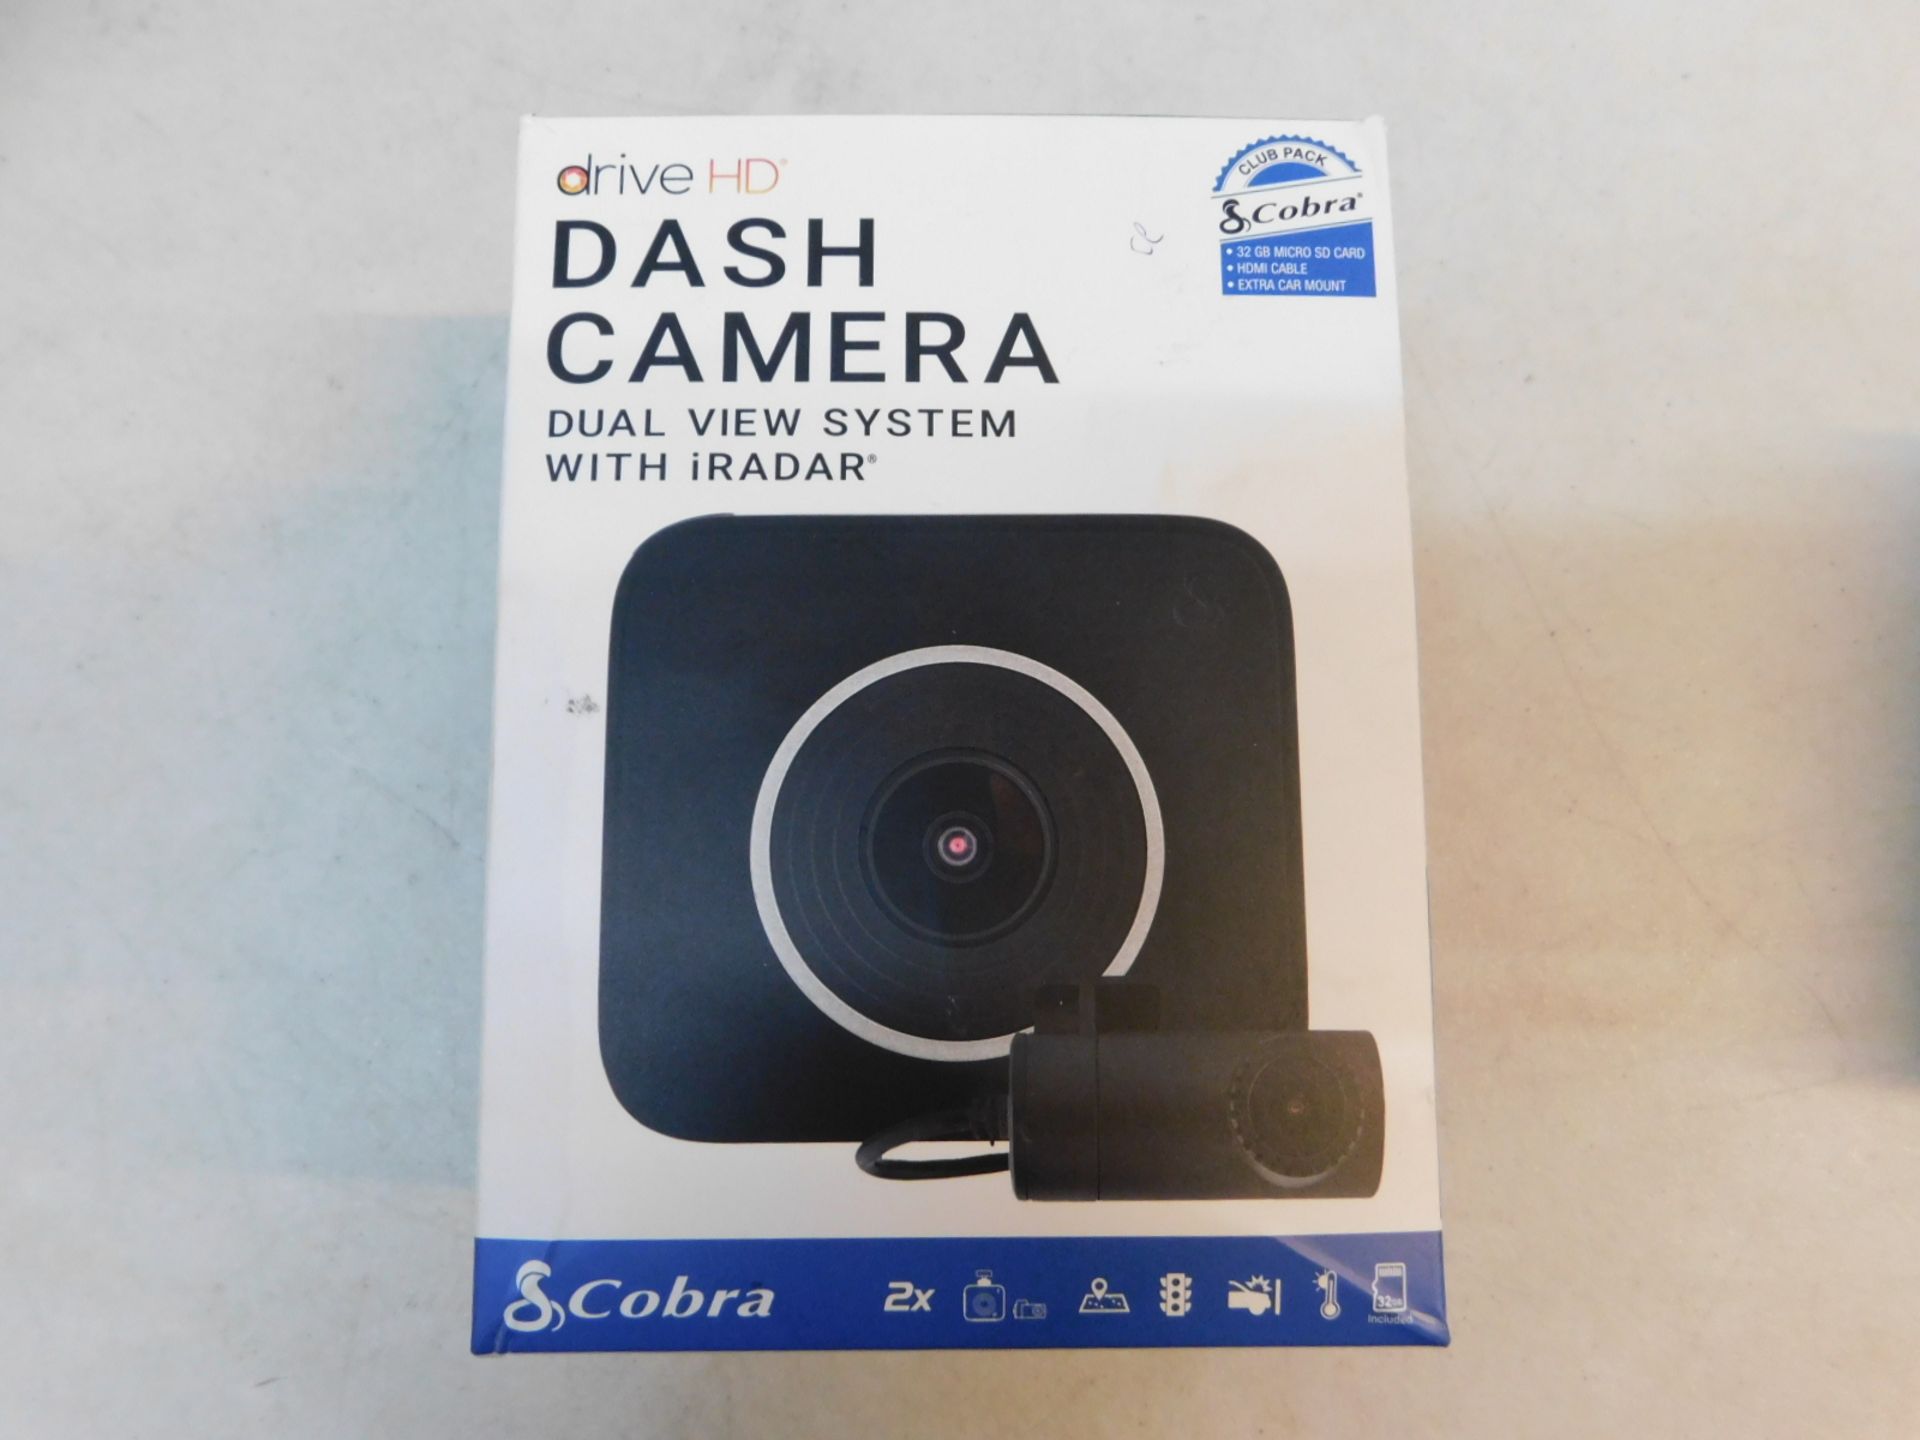 1 BOXED COBRA DRIVE HD DUAL VIEW DASH CAM RRP Â£199 (ONLY 1 CAMERA IN THE BOX)